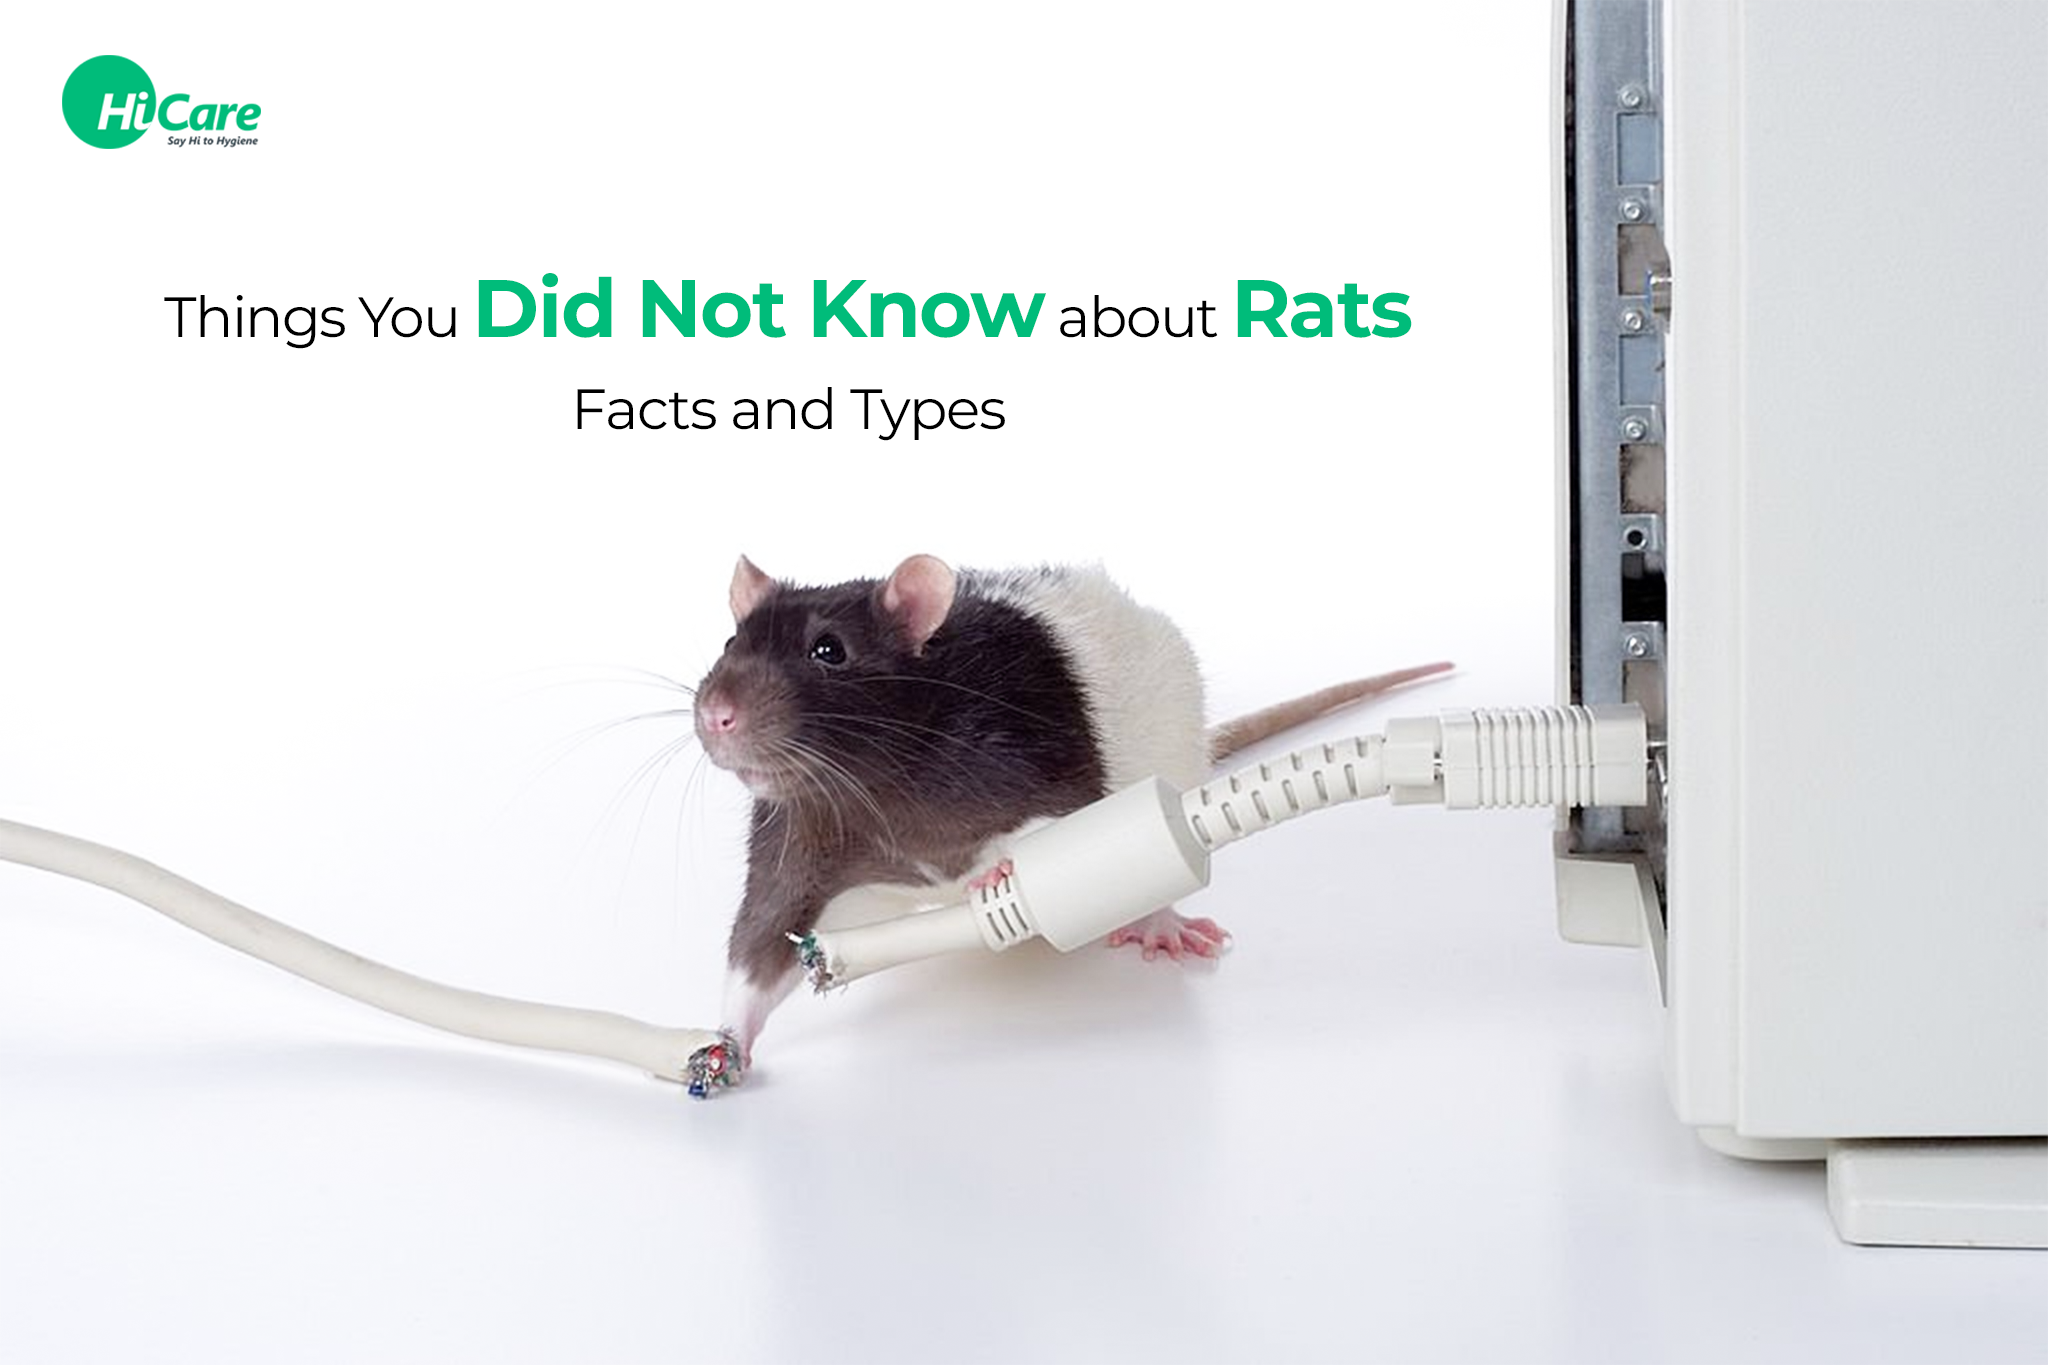 Things You Did Not Know about Rats: Facts and Types